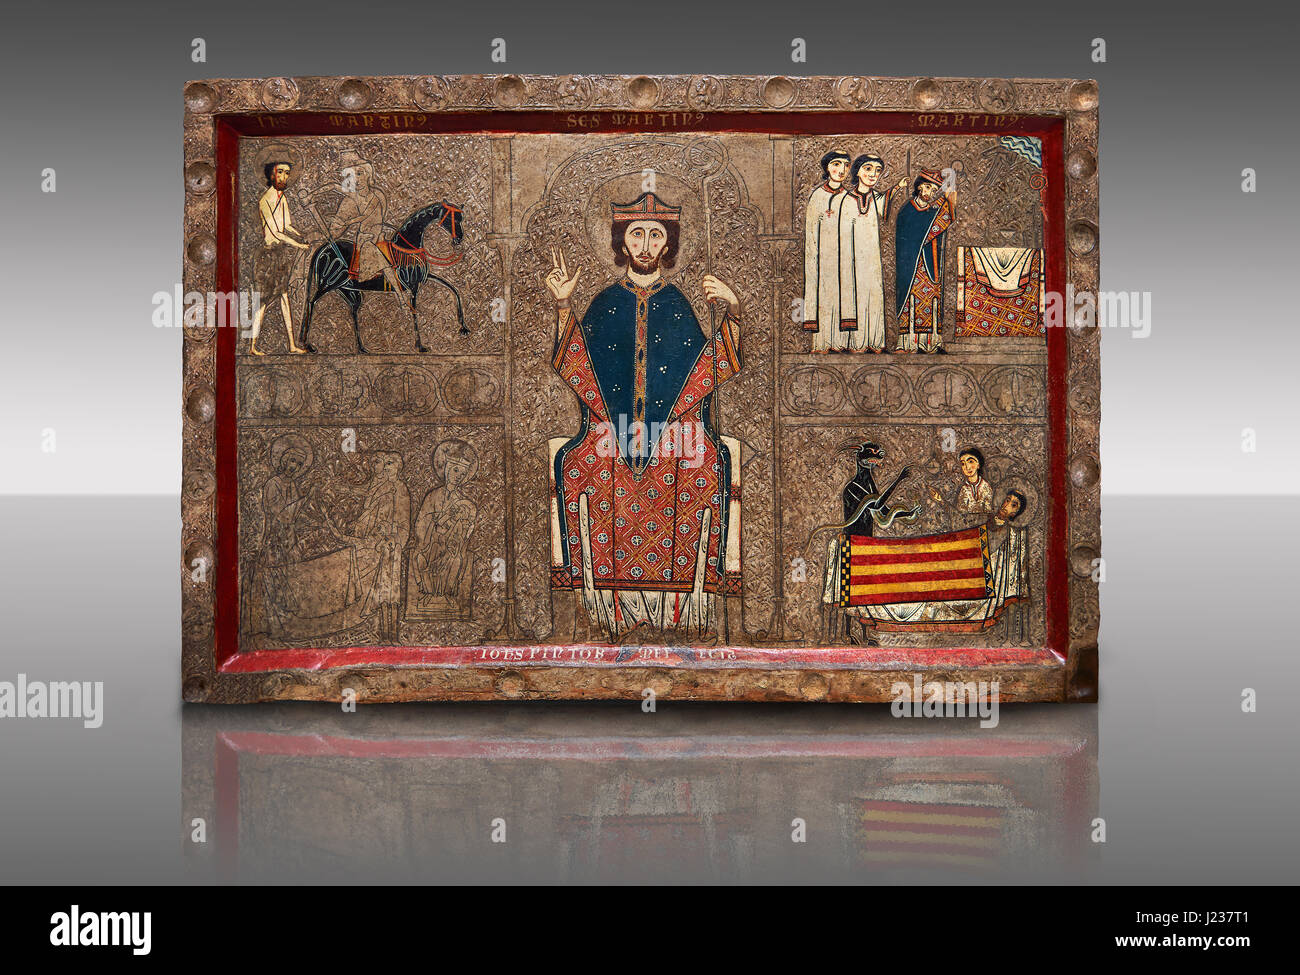 Romanesque painted Gia altar front, 13th century from the church of Santa Maria Gia and Xia, High Ribagorca, Huesca, Spain, Stock Photo